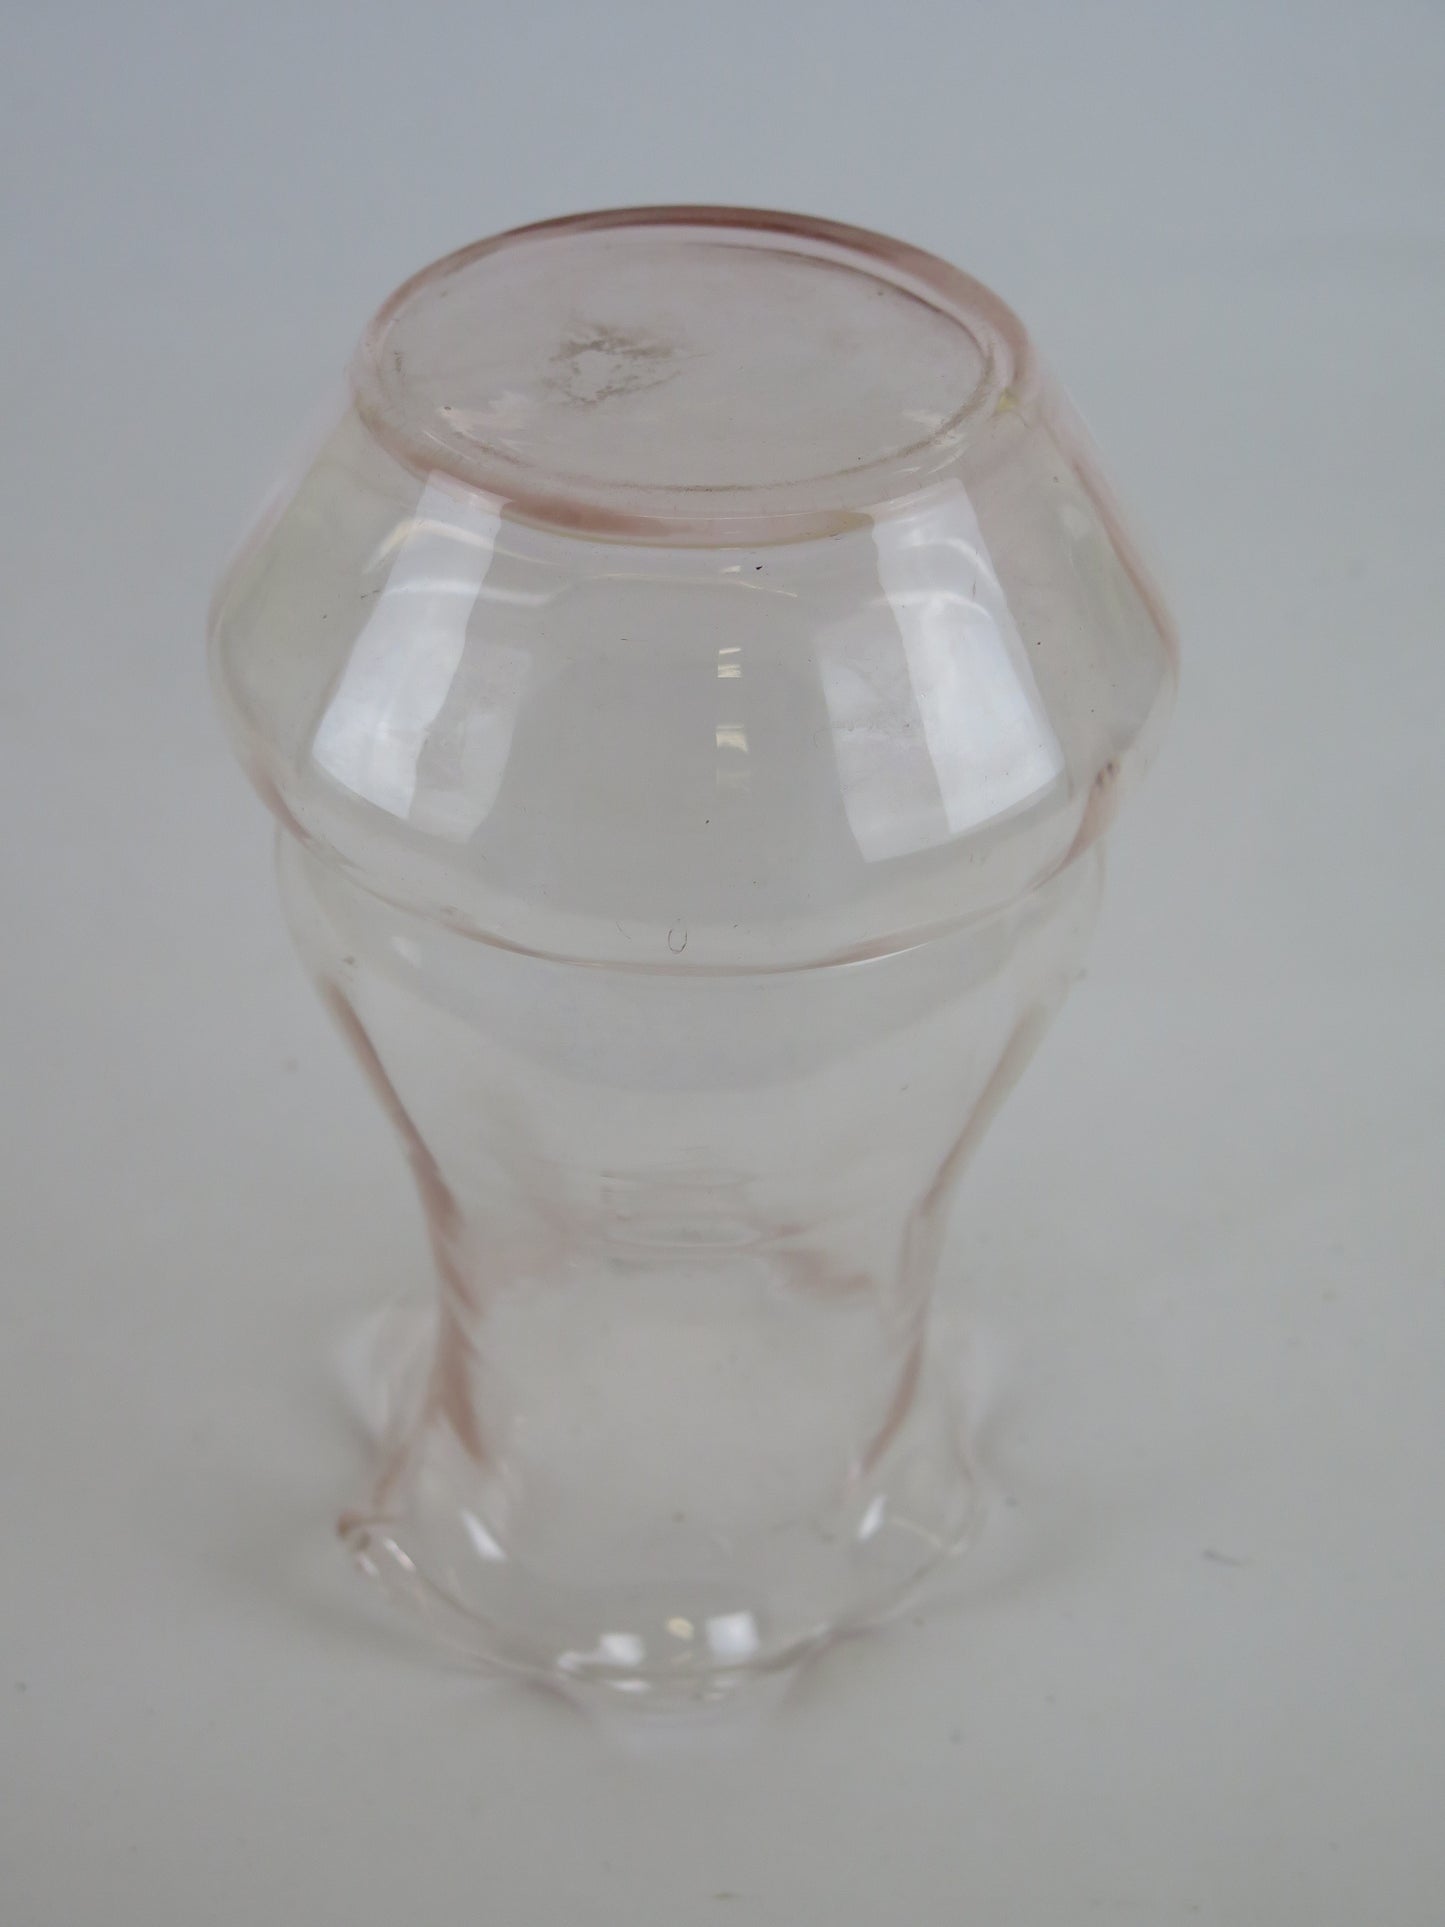 ANTIQUE BLOWN GLASS VASE WITH CHOPPED EDGE VS5